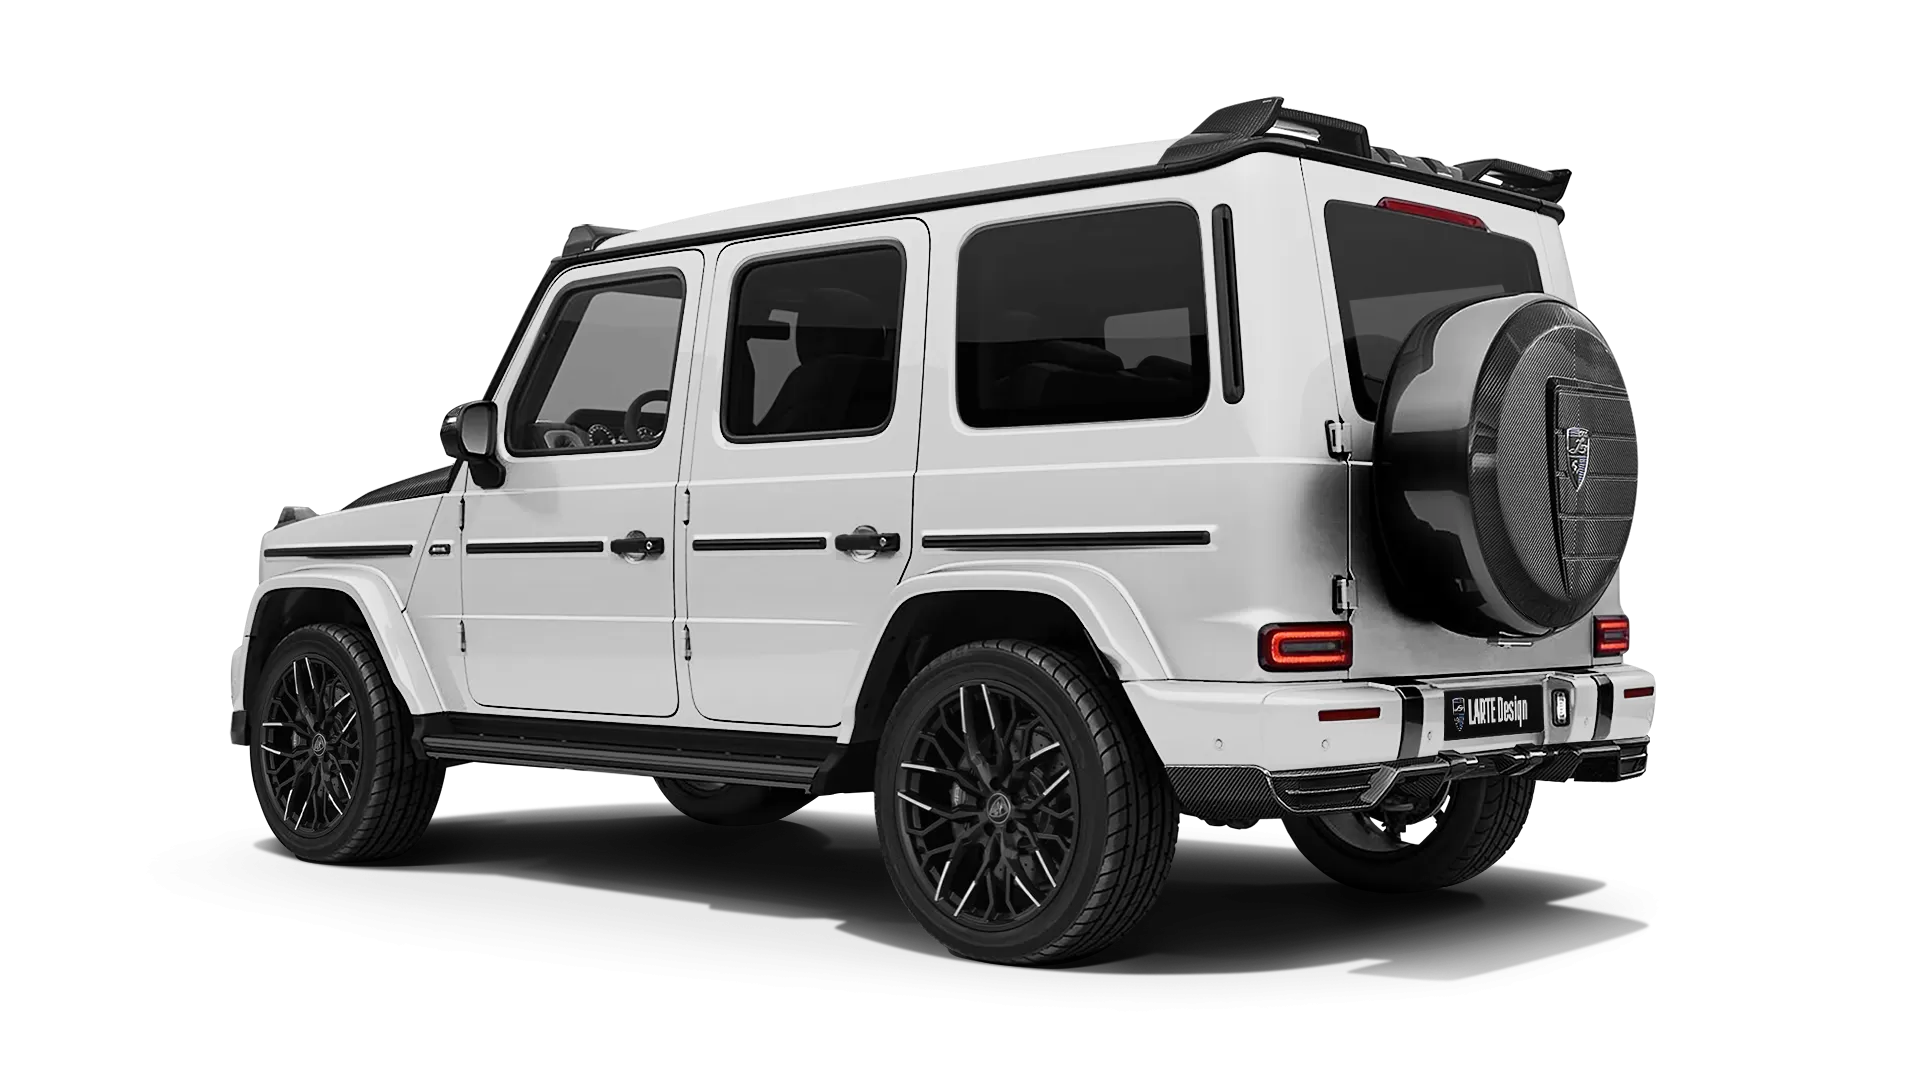 Mercedes G class W463 with carbon body kit: back view shown in Polar White